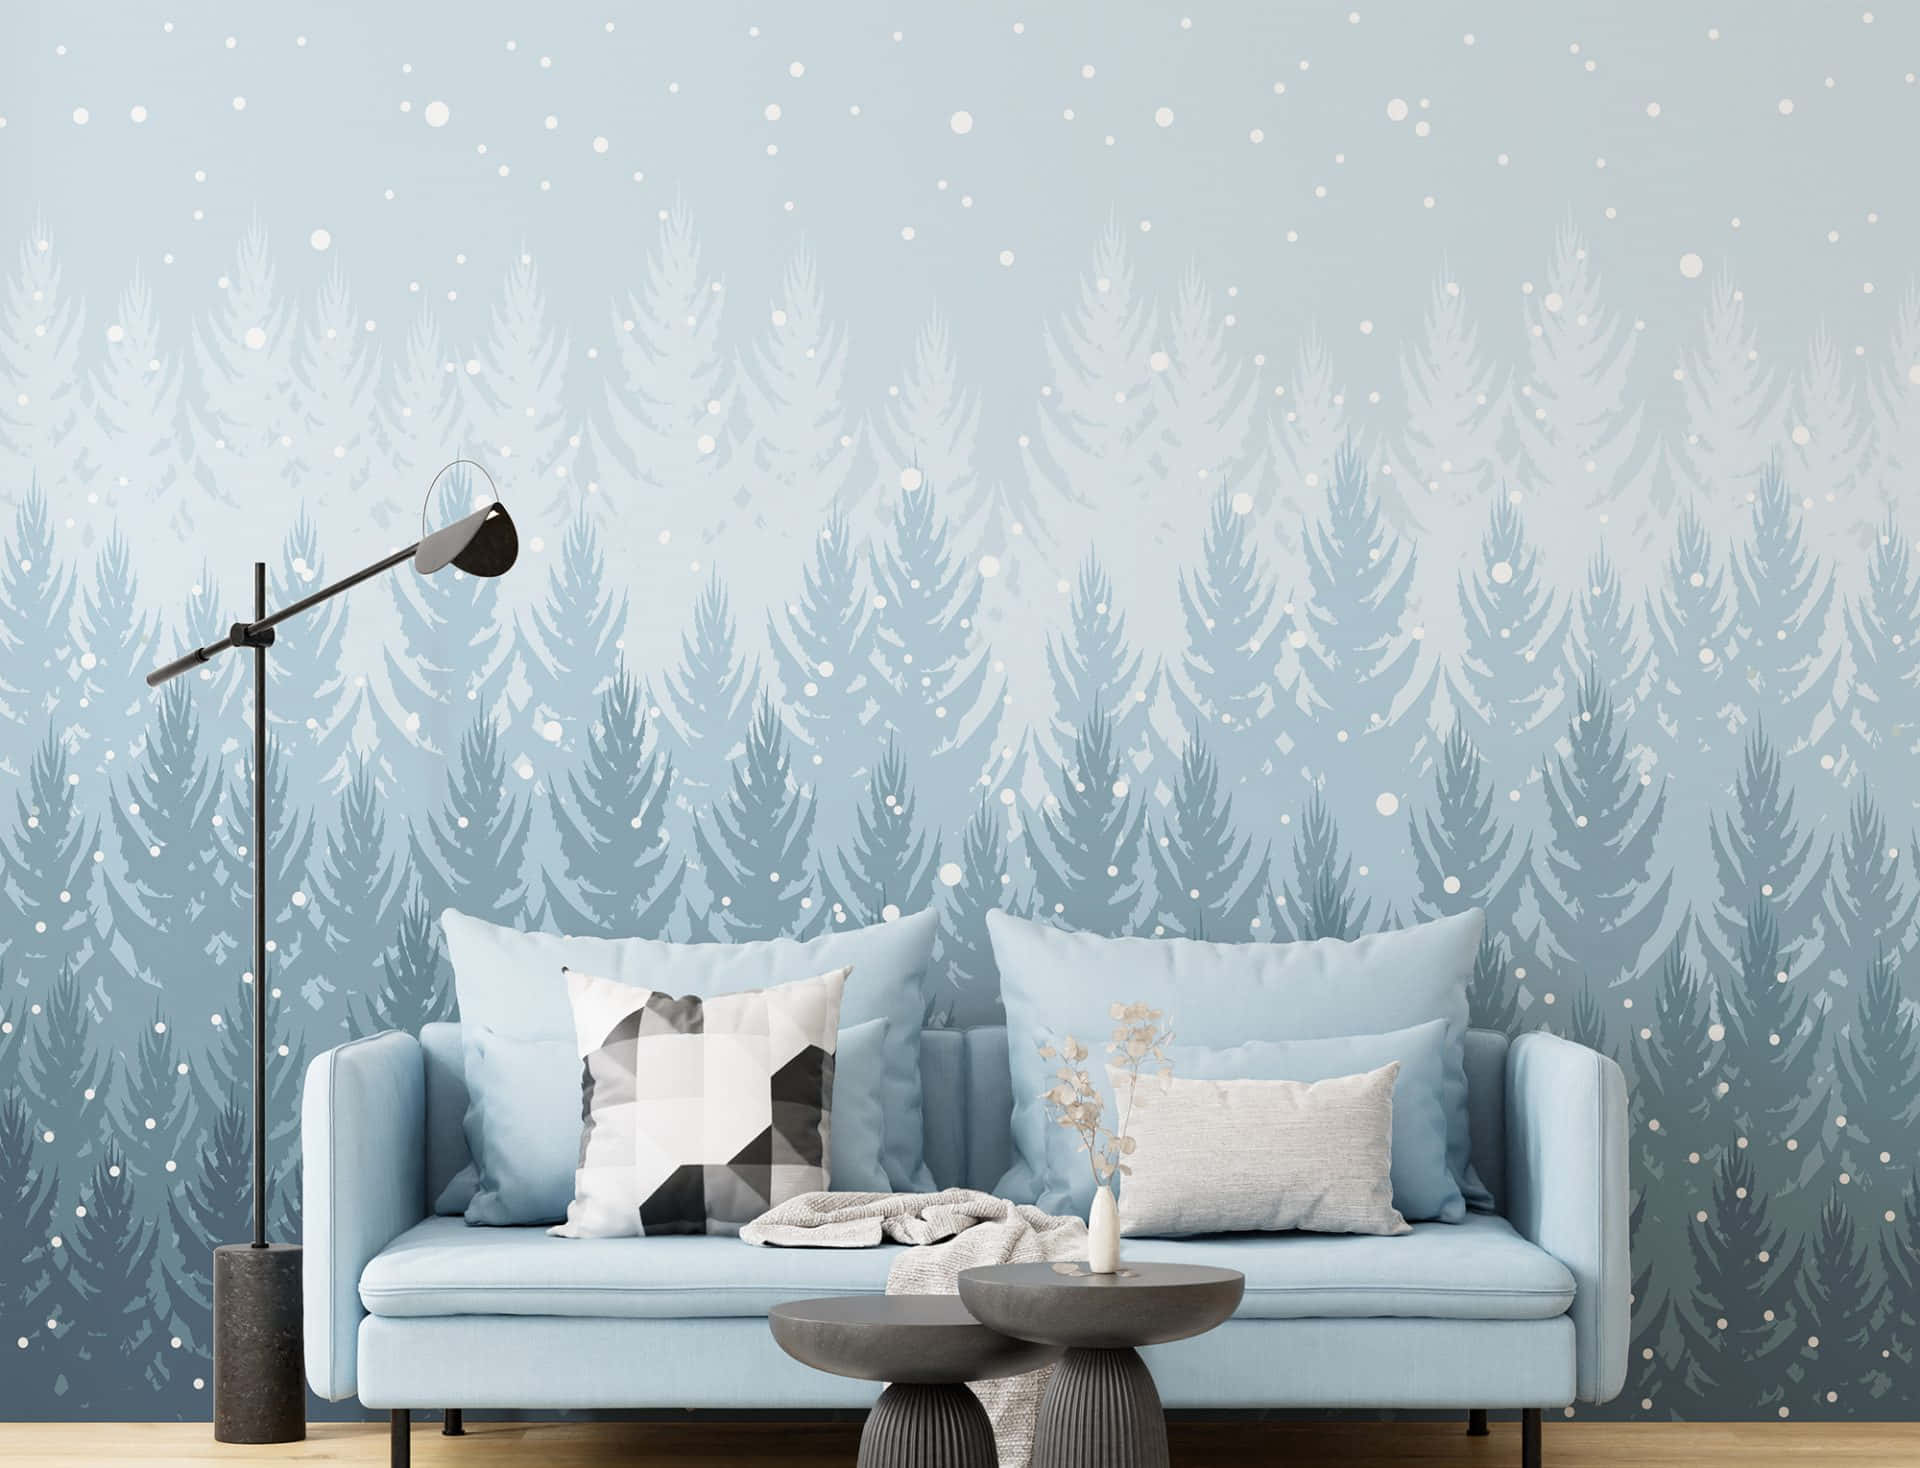 Spend your Christmas Holidays with your family in a cozy and festive Living Room